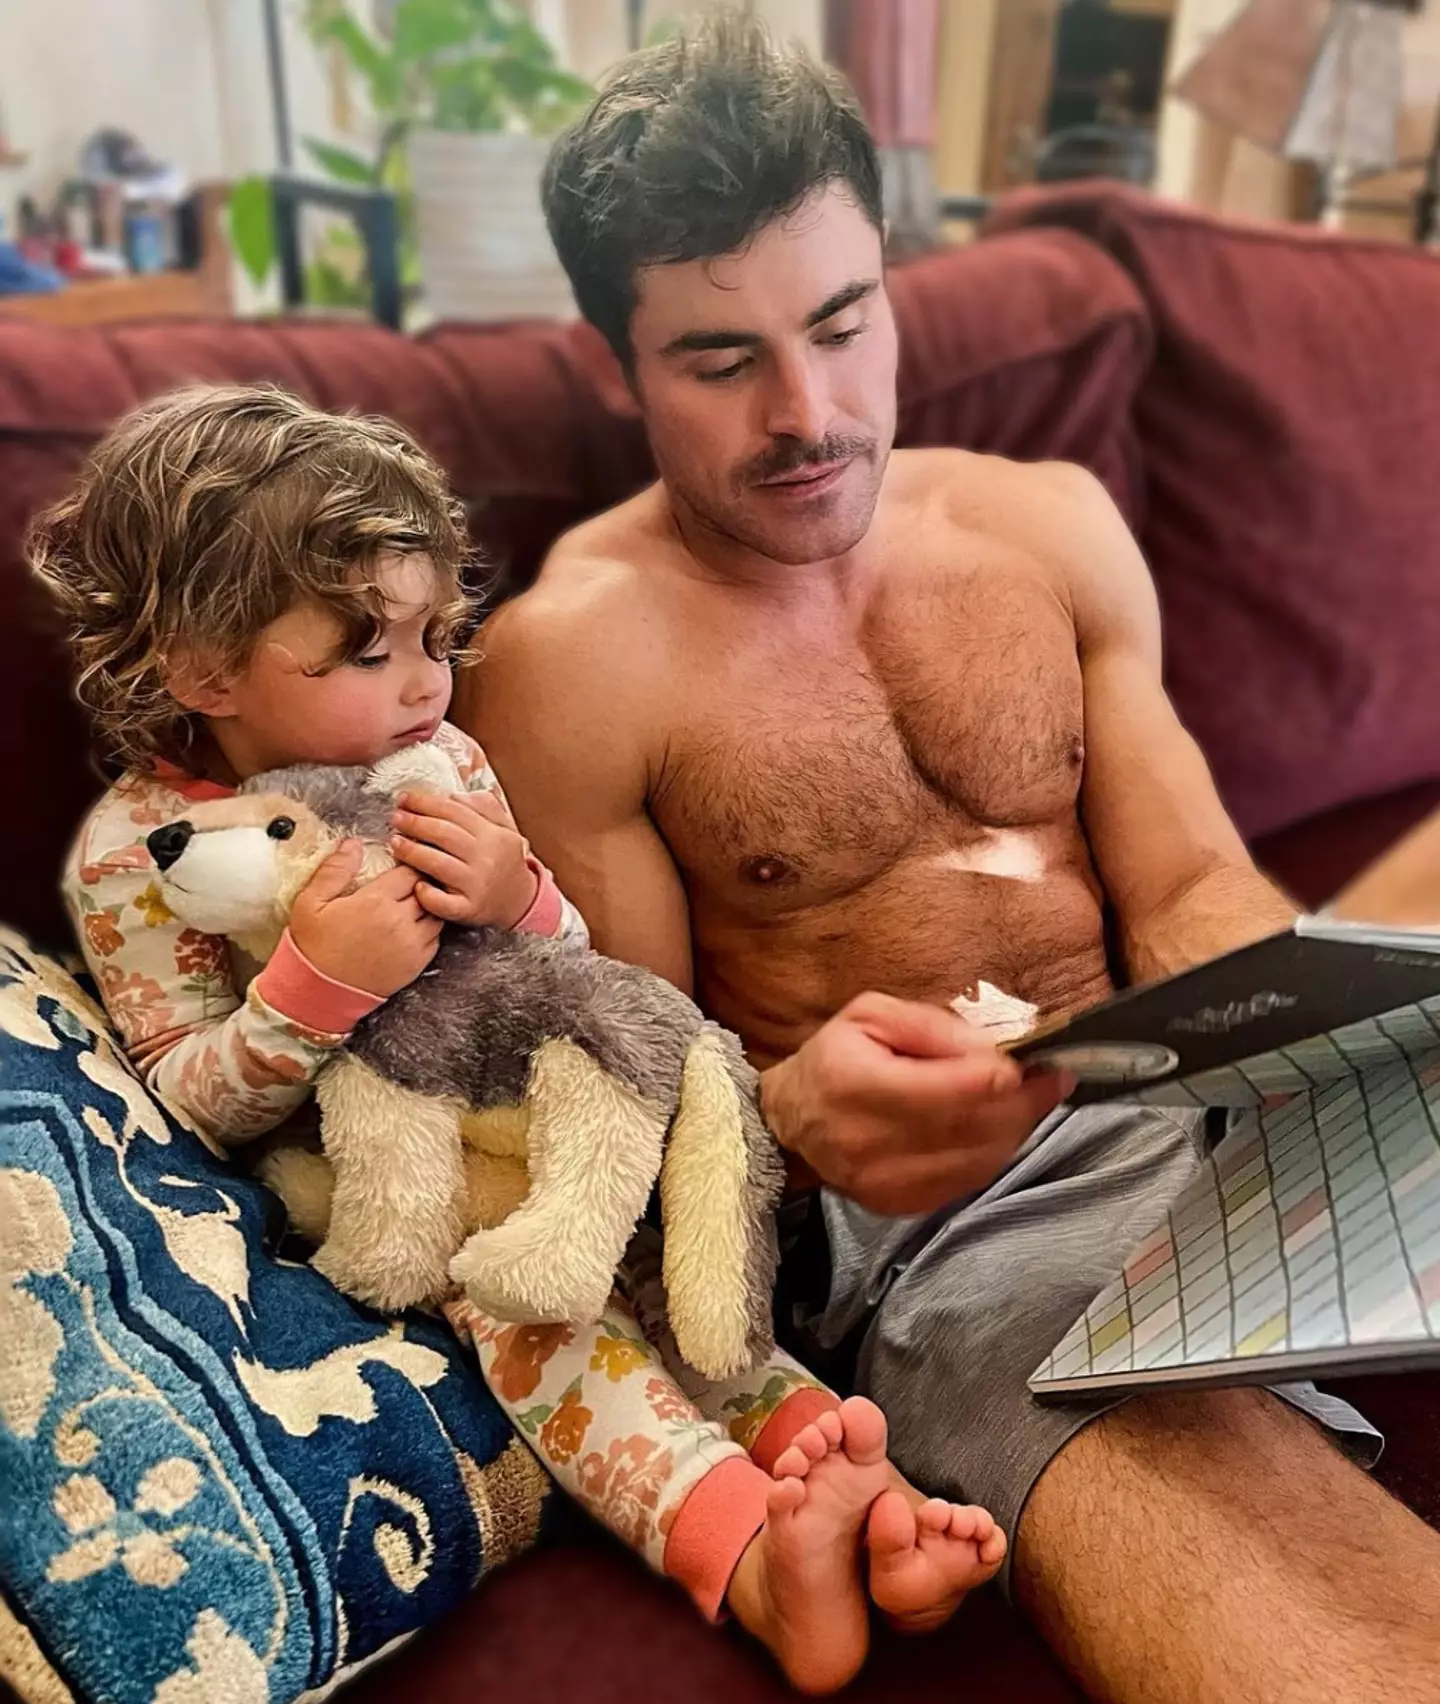 Zac's adorable post prompted a lot of gushing comments.